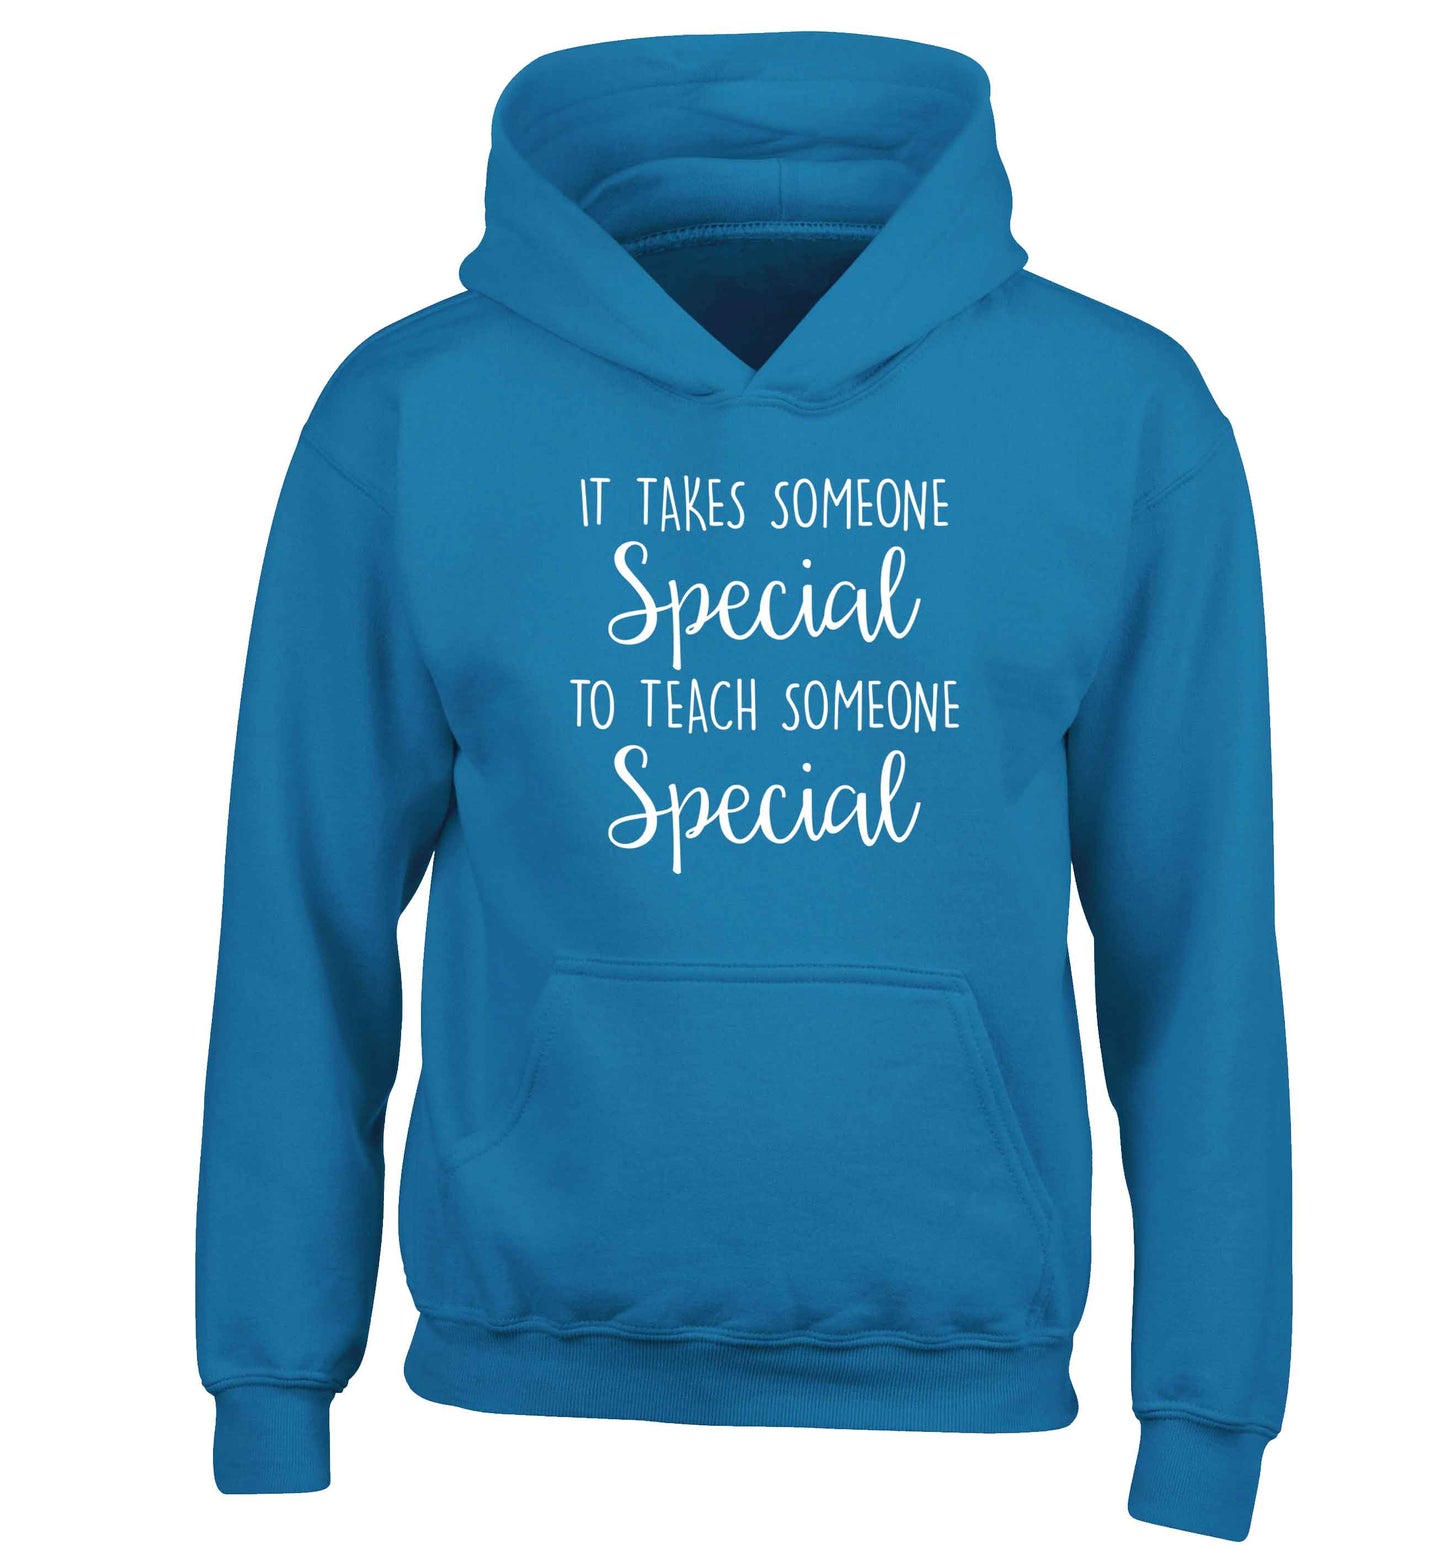 It takes someone special to teach someone special children's blue hoodie 12-13 Years